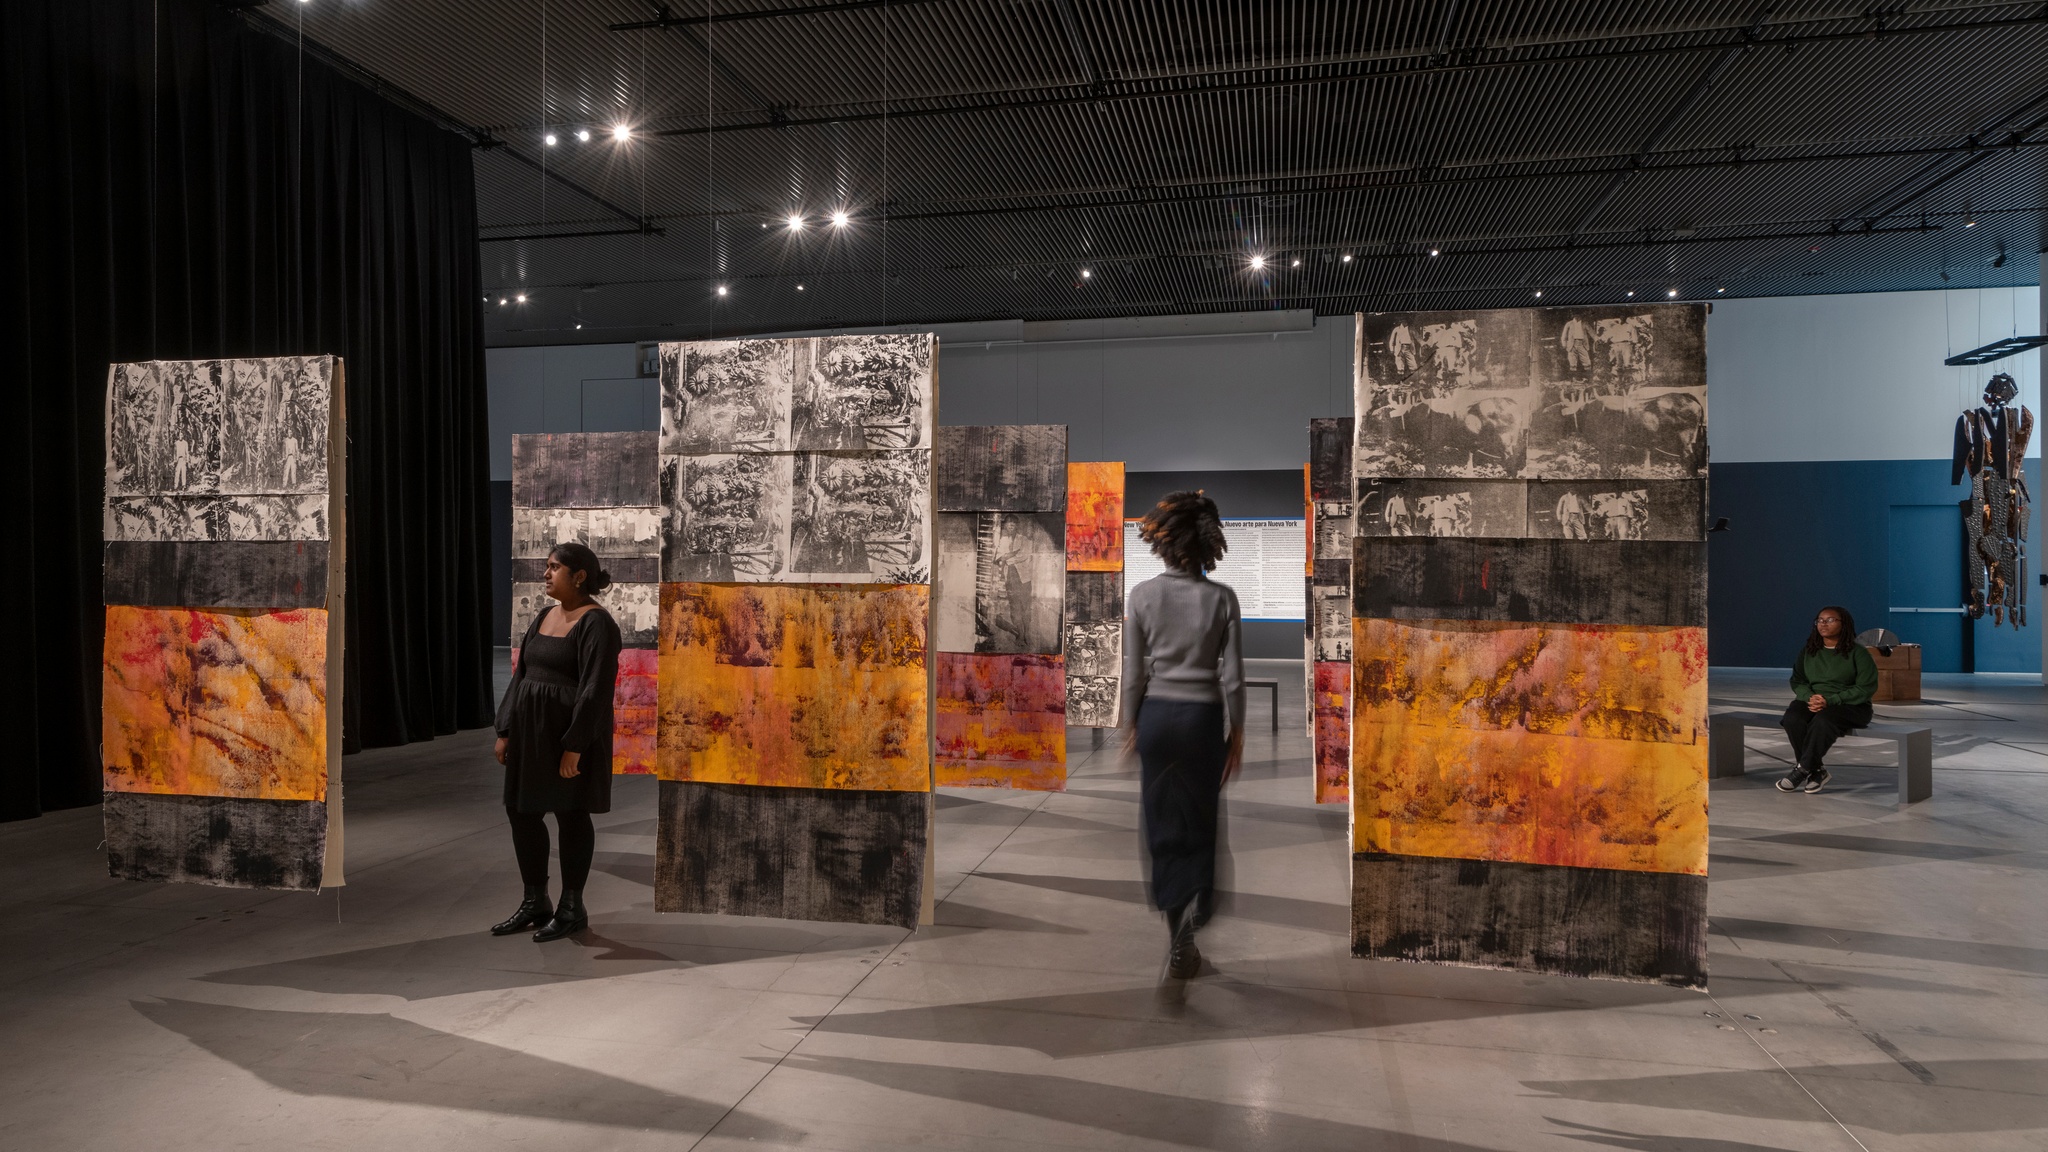 Nine painted fabric panels hang from a gallery ceiling in a grid. Two gallery visitors walk between the panels. The panels are painted in orange and black bands, with screen printed sections with black and white images of banana plantation workers in the 1920s.